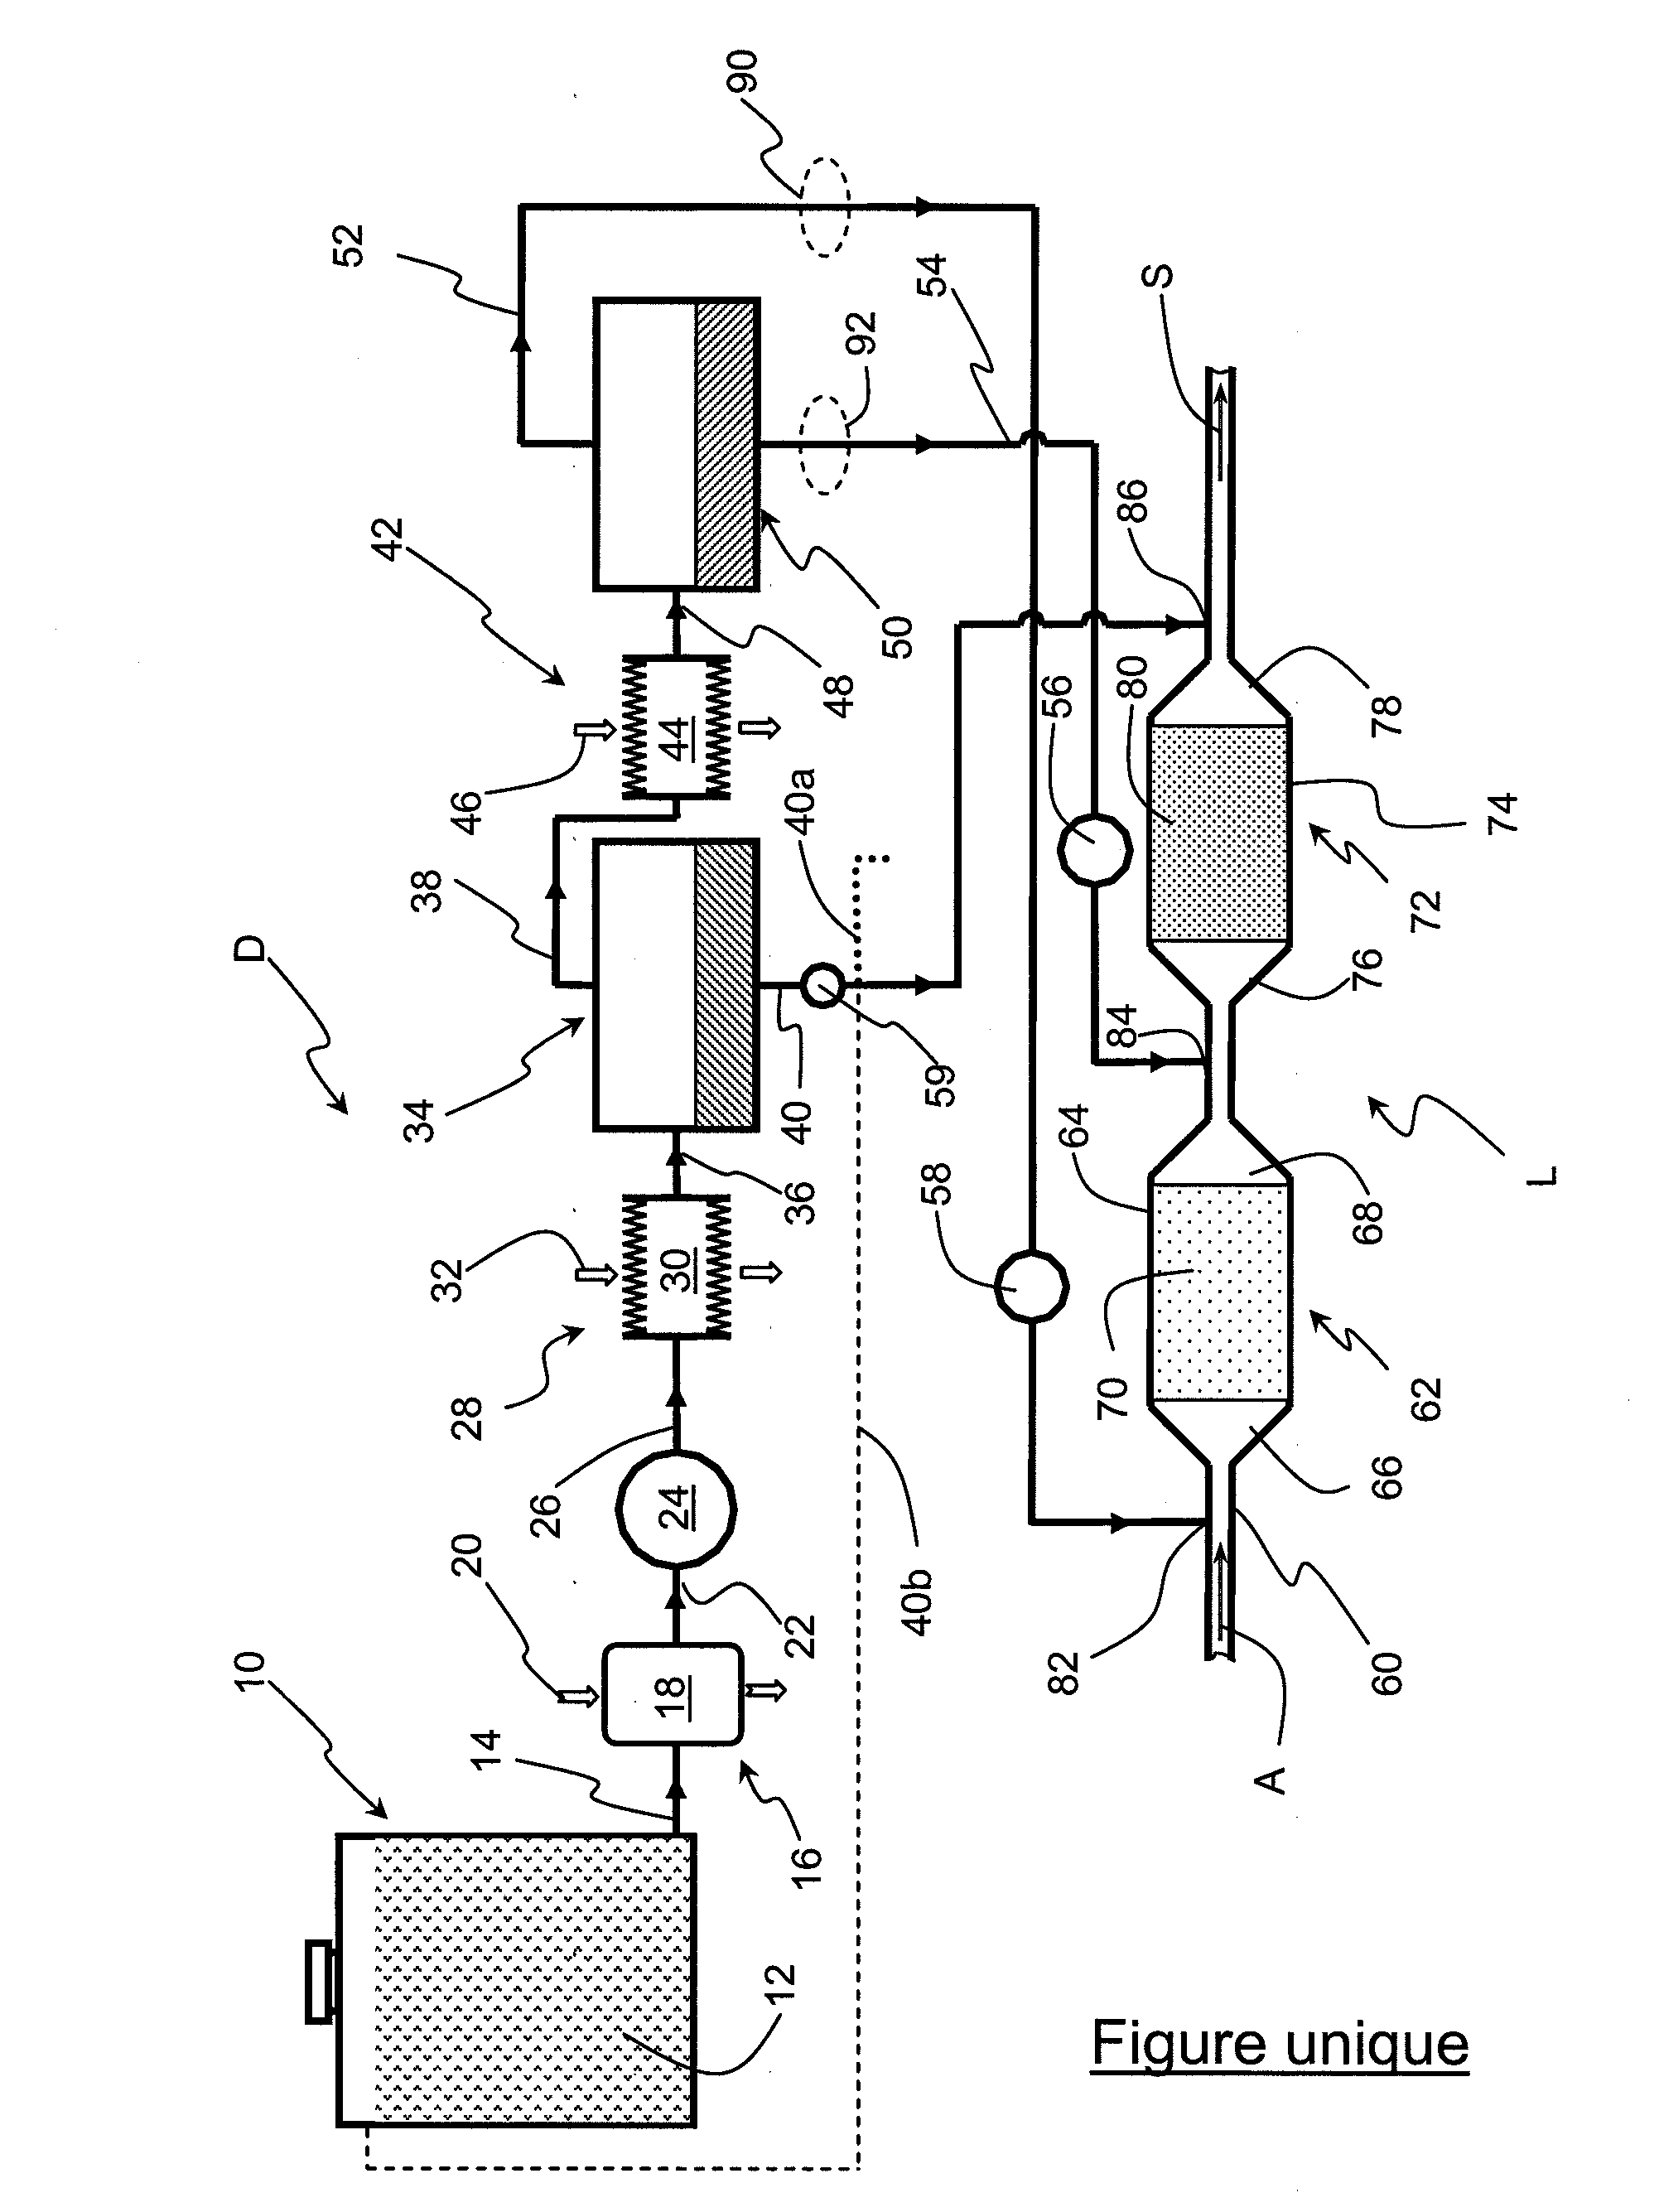 Method of treating pollutants contained in exhaust gases, notably of an internal-combustion engine, and system using same